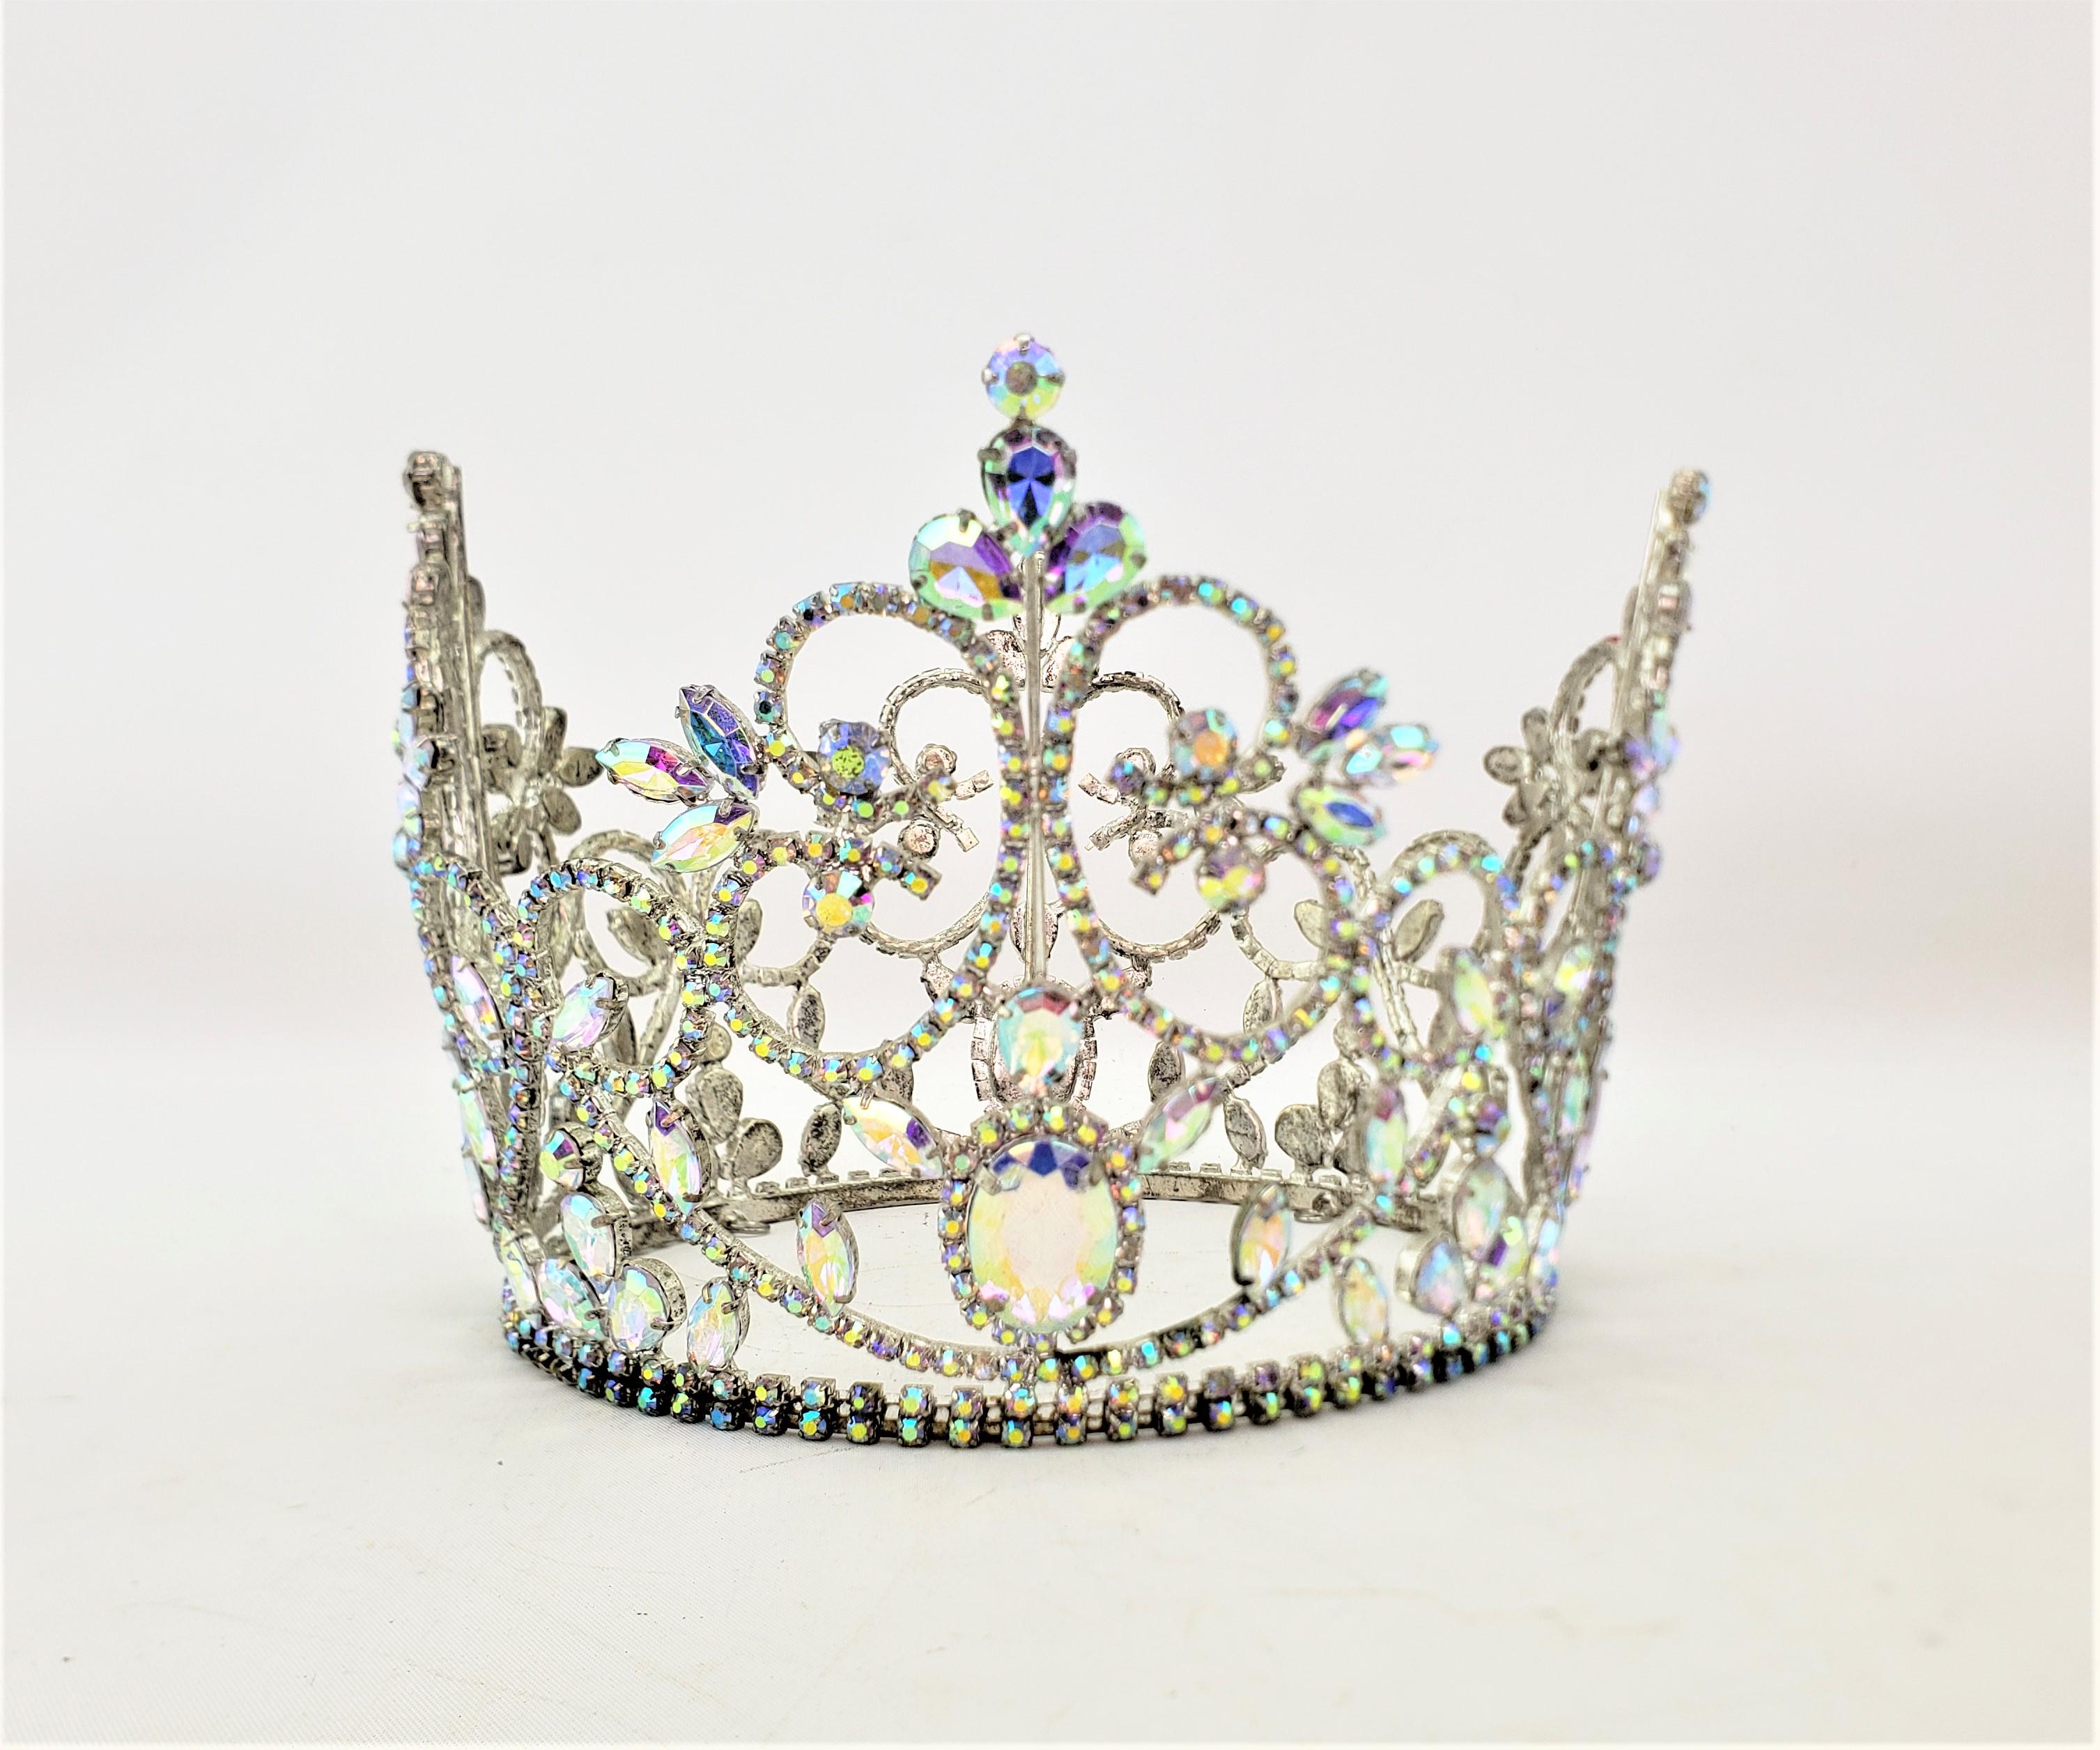 This vintage crown is unsigned, but presumed to have originated from the United States and date to approximately 1955 and done in the period Mid-Century Modern style. The frame of the crown is done in a silver paste with hundreds of small and cut